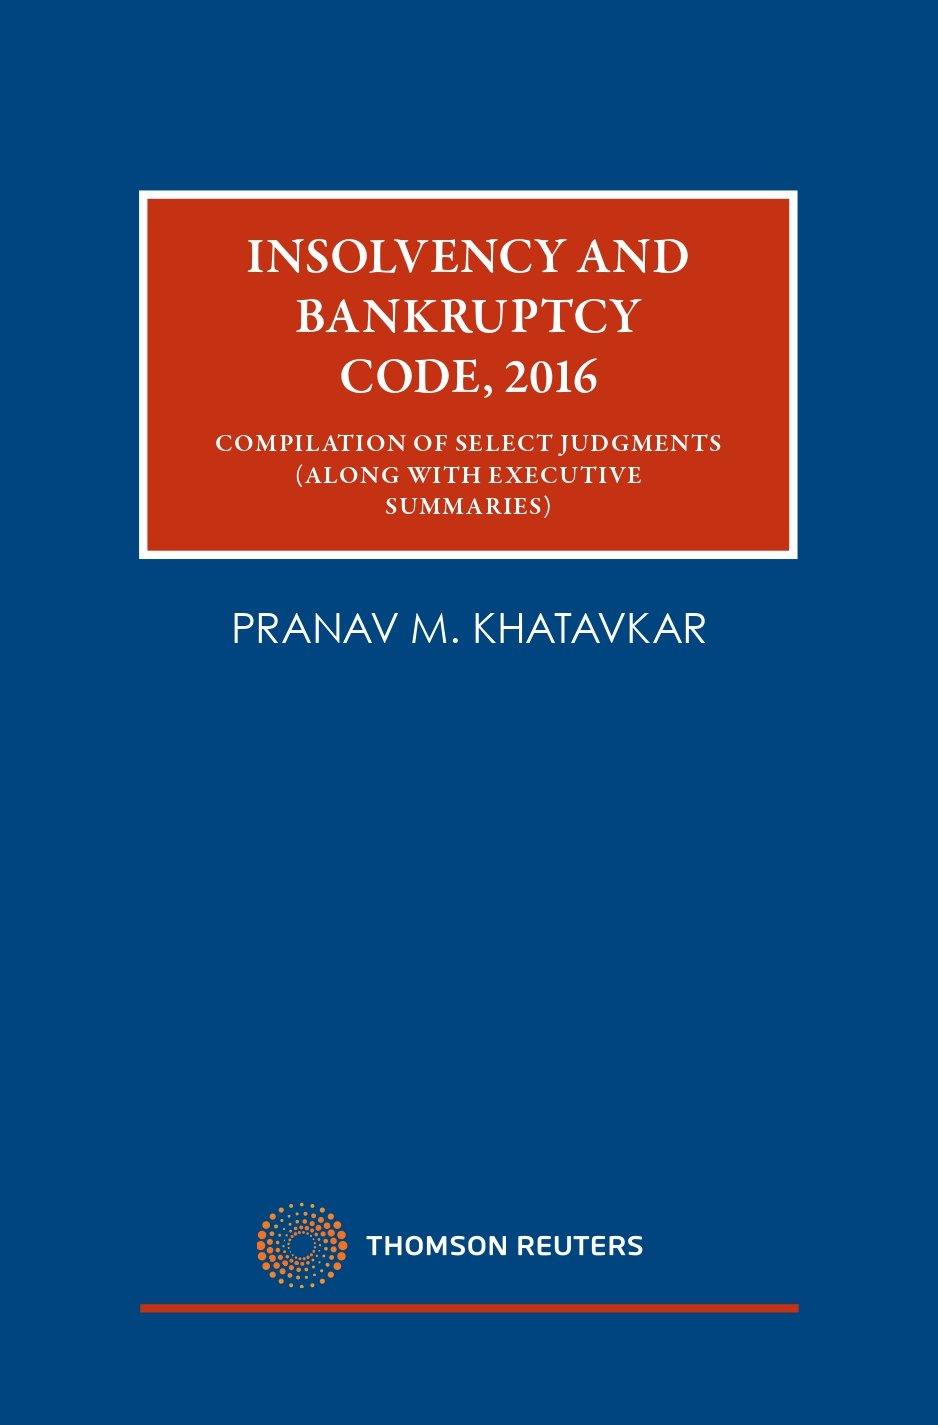 Insolvency and Bankruptcy Code, 2016-Compilation of Select Judgements